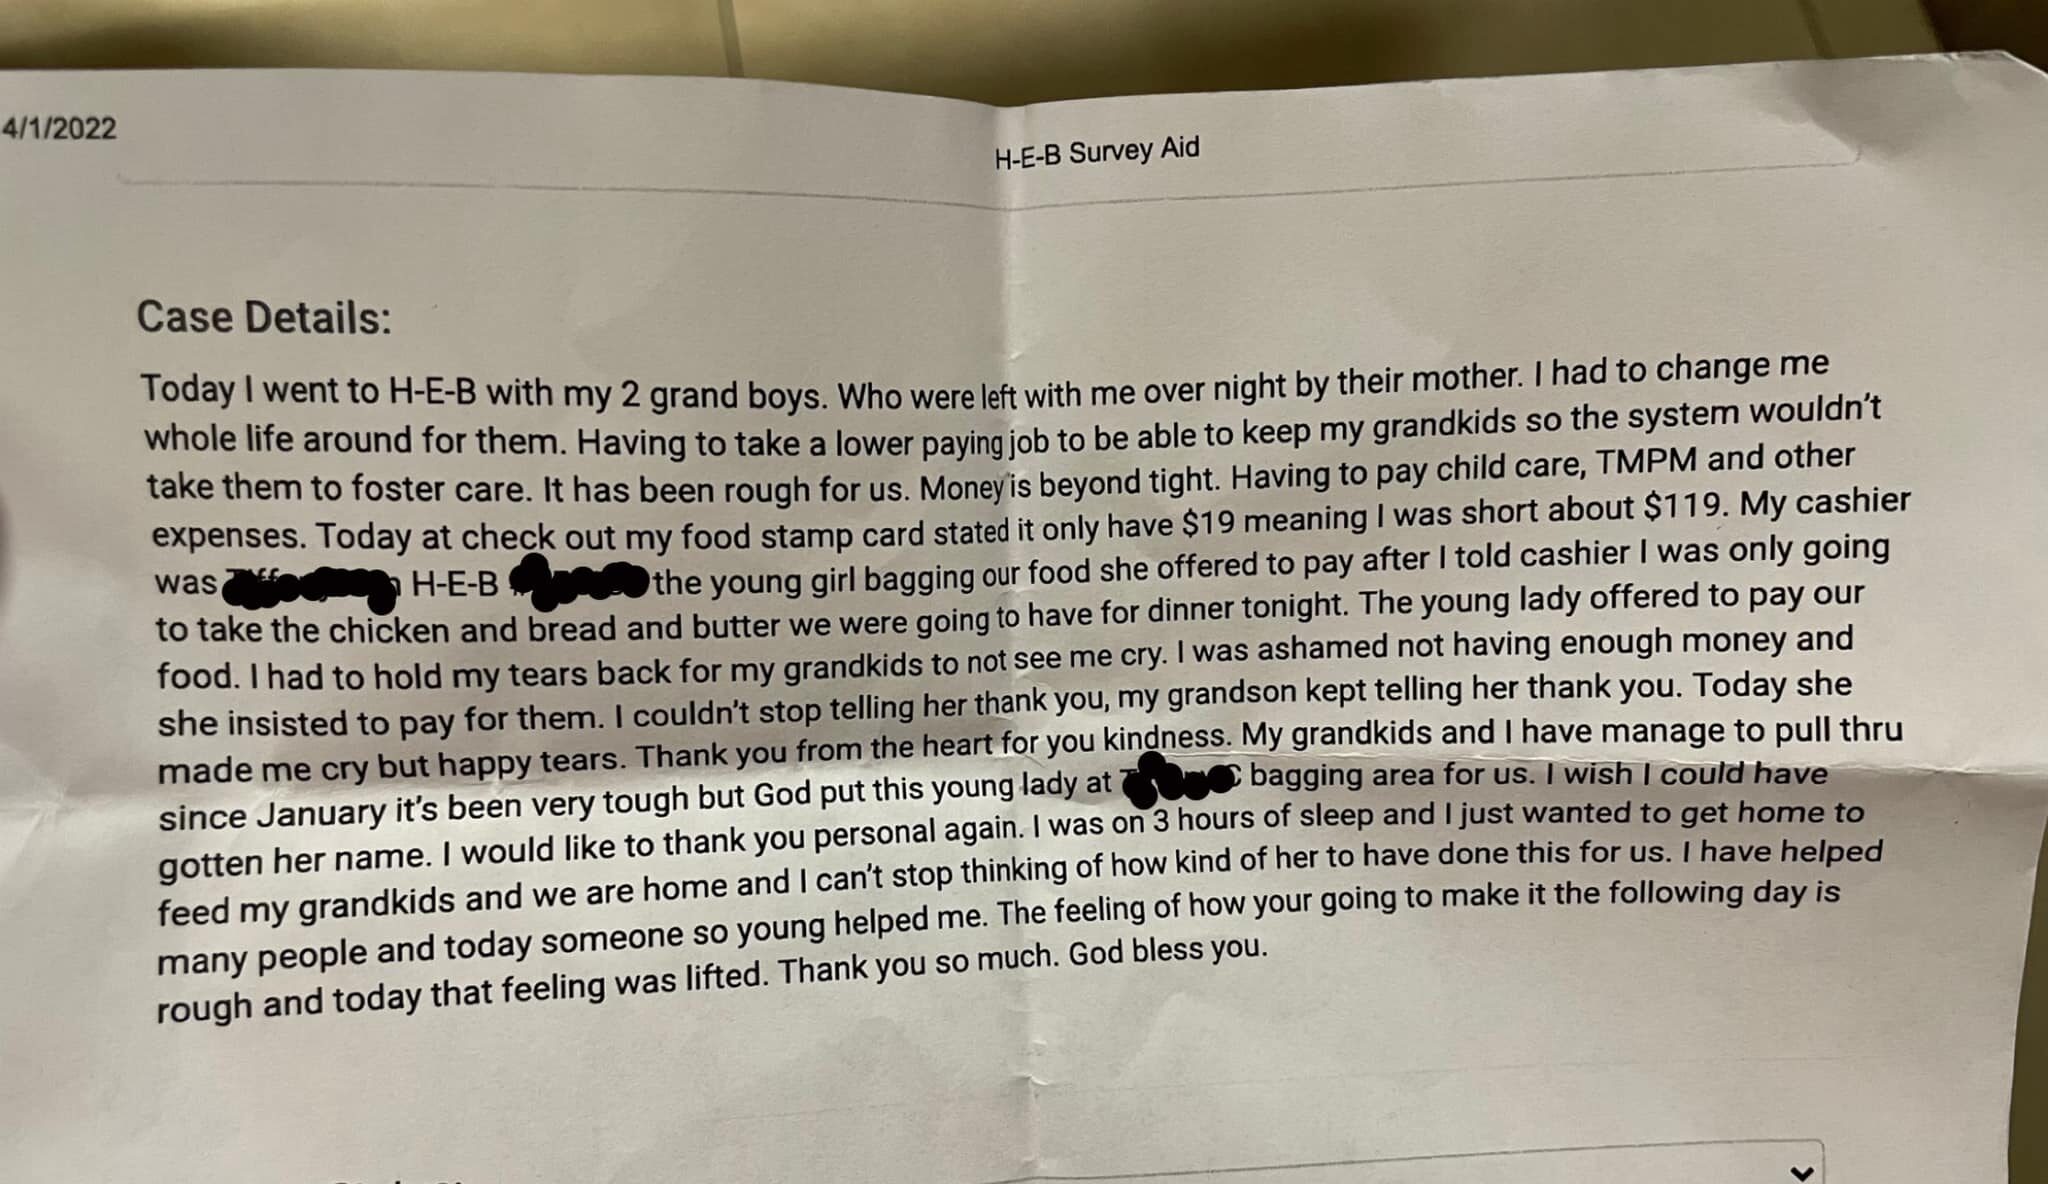 photo of a note from a woman who went to an h-e-b store and had her groceries paid for by the bagger, maria balboa. in it she thanks her for her kindness and explains that she's been taking care of her two grandkids, alone, since january 2021 after their mother left them. she works a low-paying job and is barely getting by.